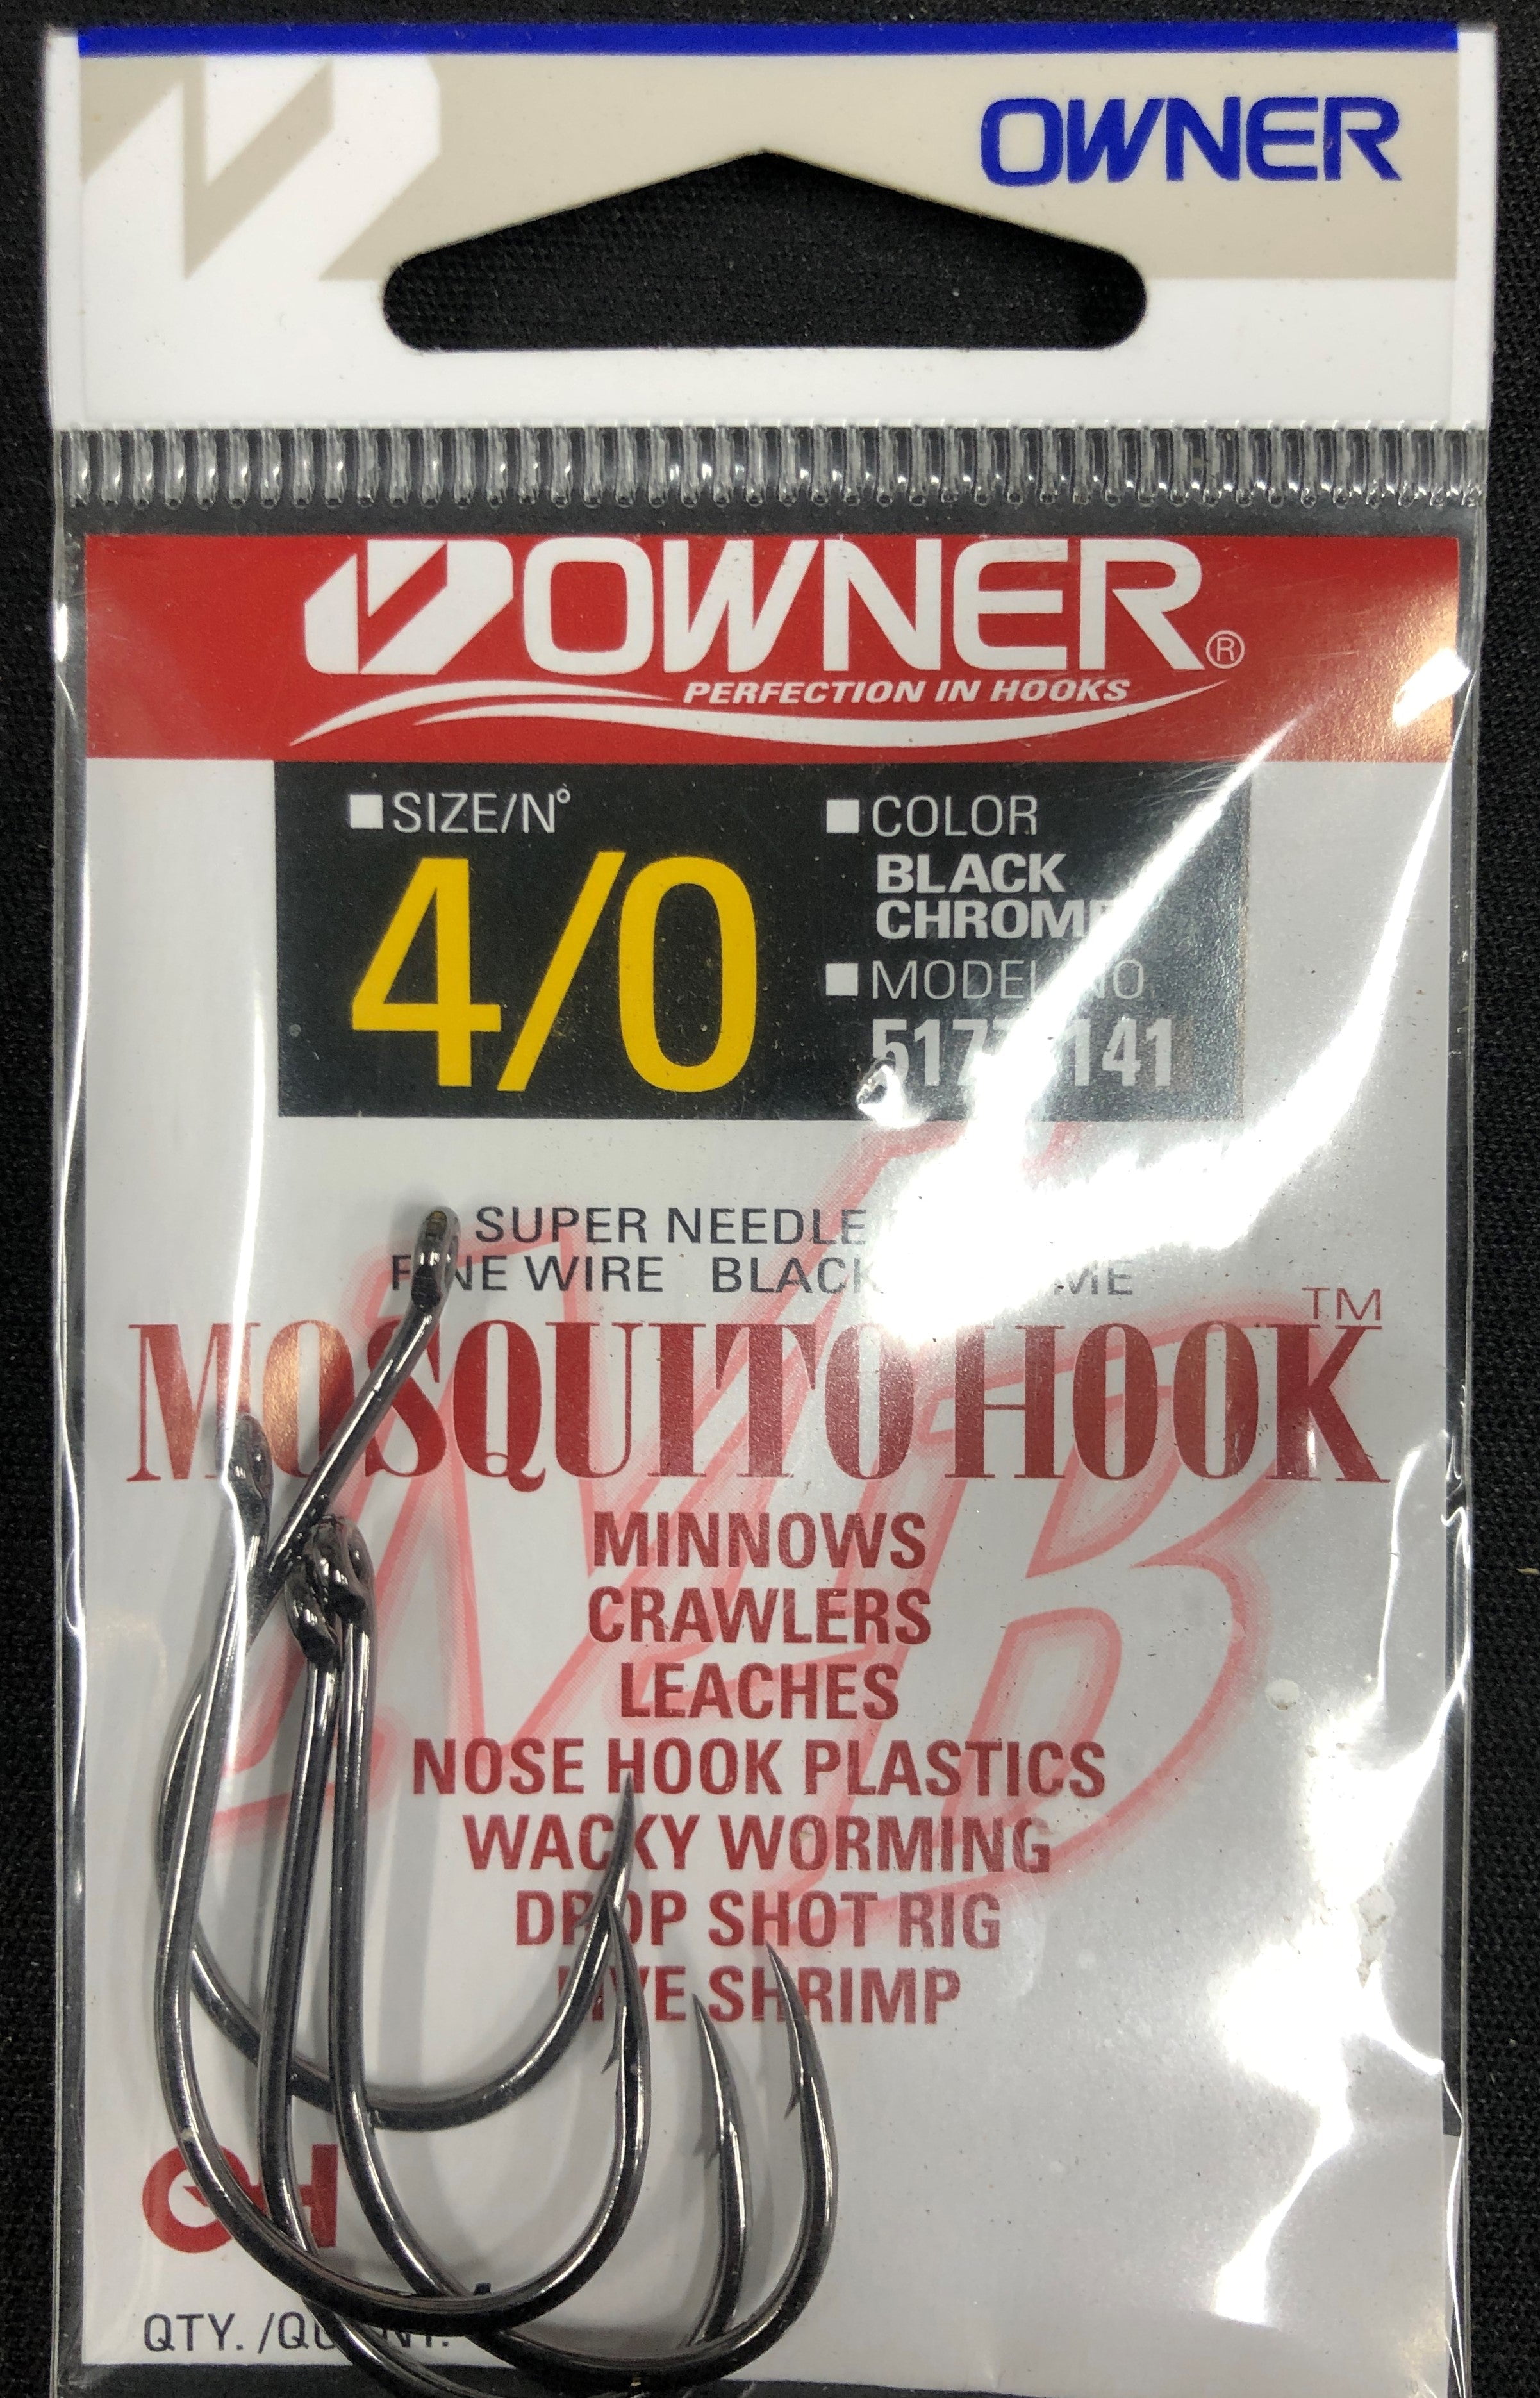 Owner Mosquito Hook Black / Size 3/0